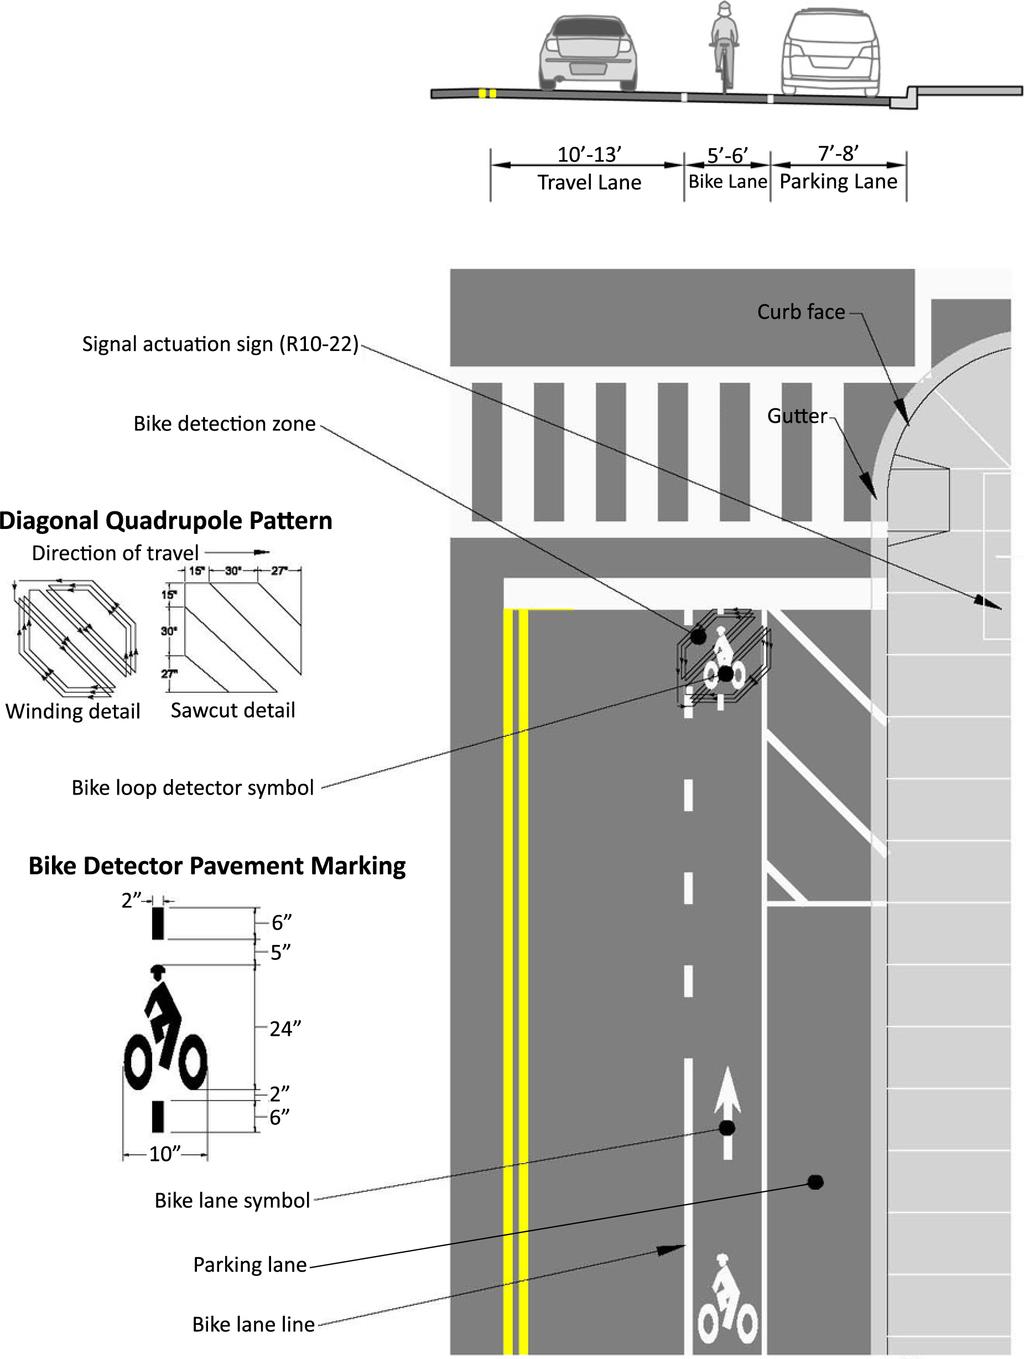 CHAPTER 6 DESIGN AND APPLICATION OF GUIDELINES AND STANDARDS be necessary to install bicycle specific loop detectors on roadways with bicycle lanes if the motor vehicle loop does not extend into the